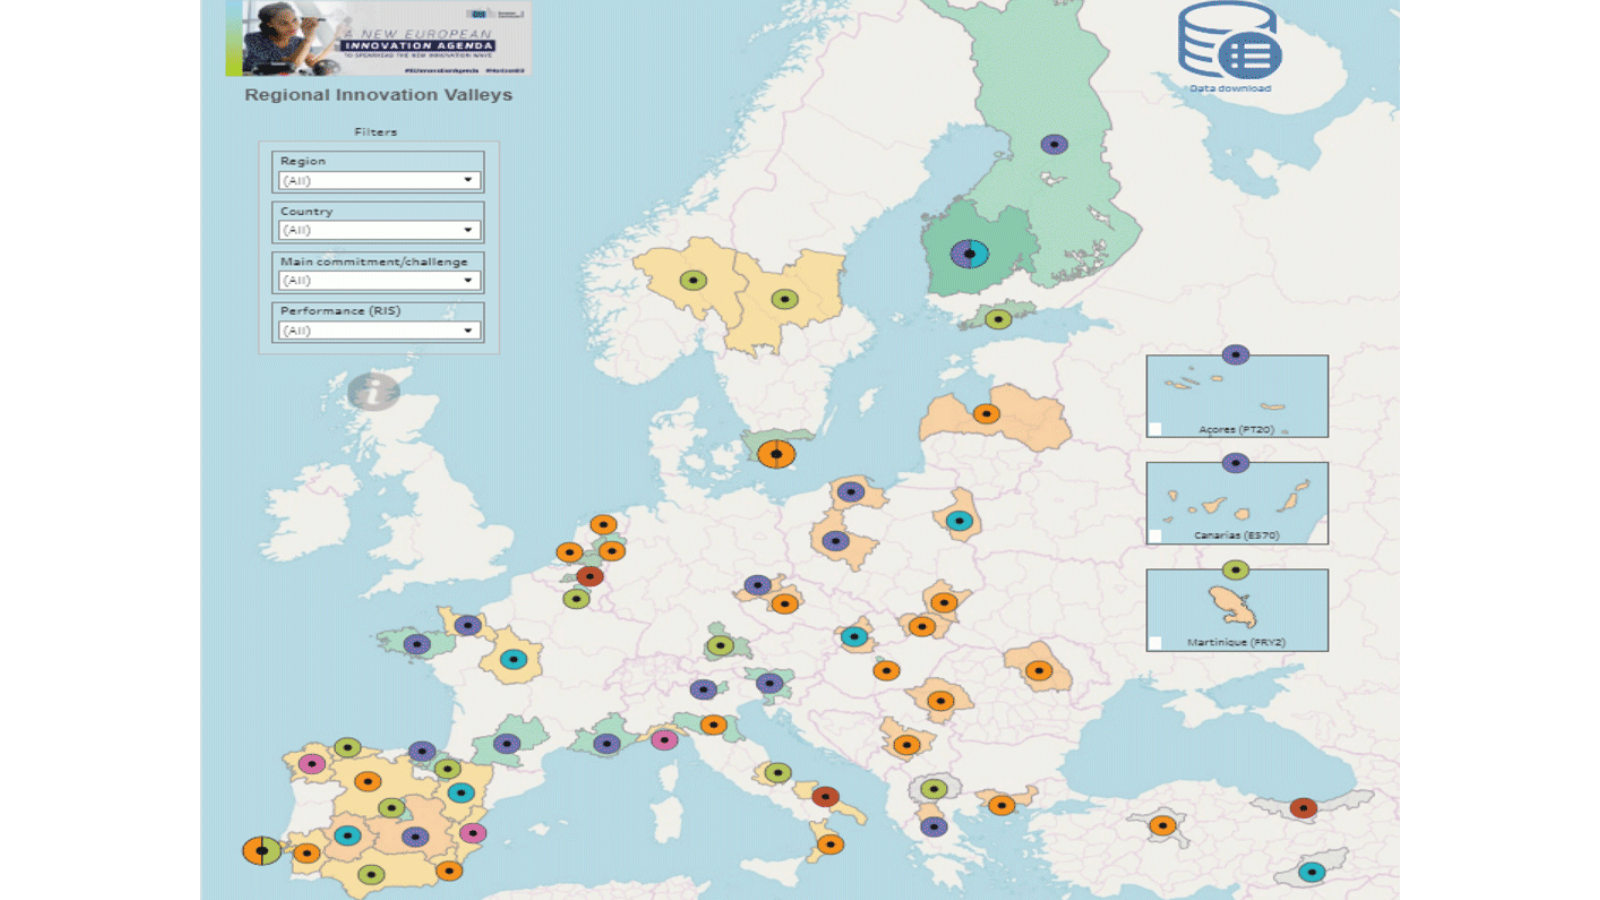 Regional Innovation Valleys - Map of the European Commission